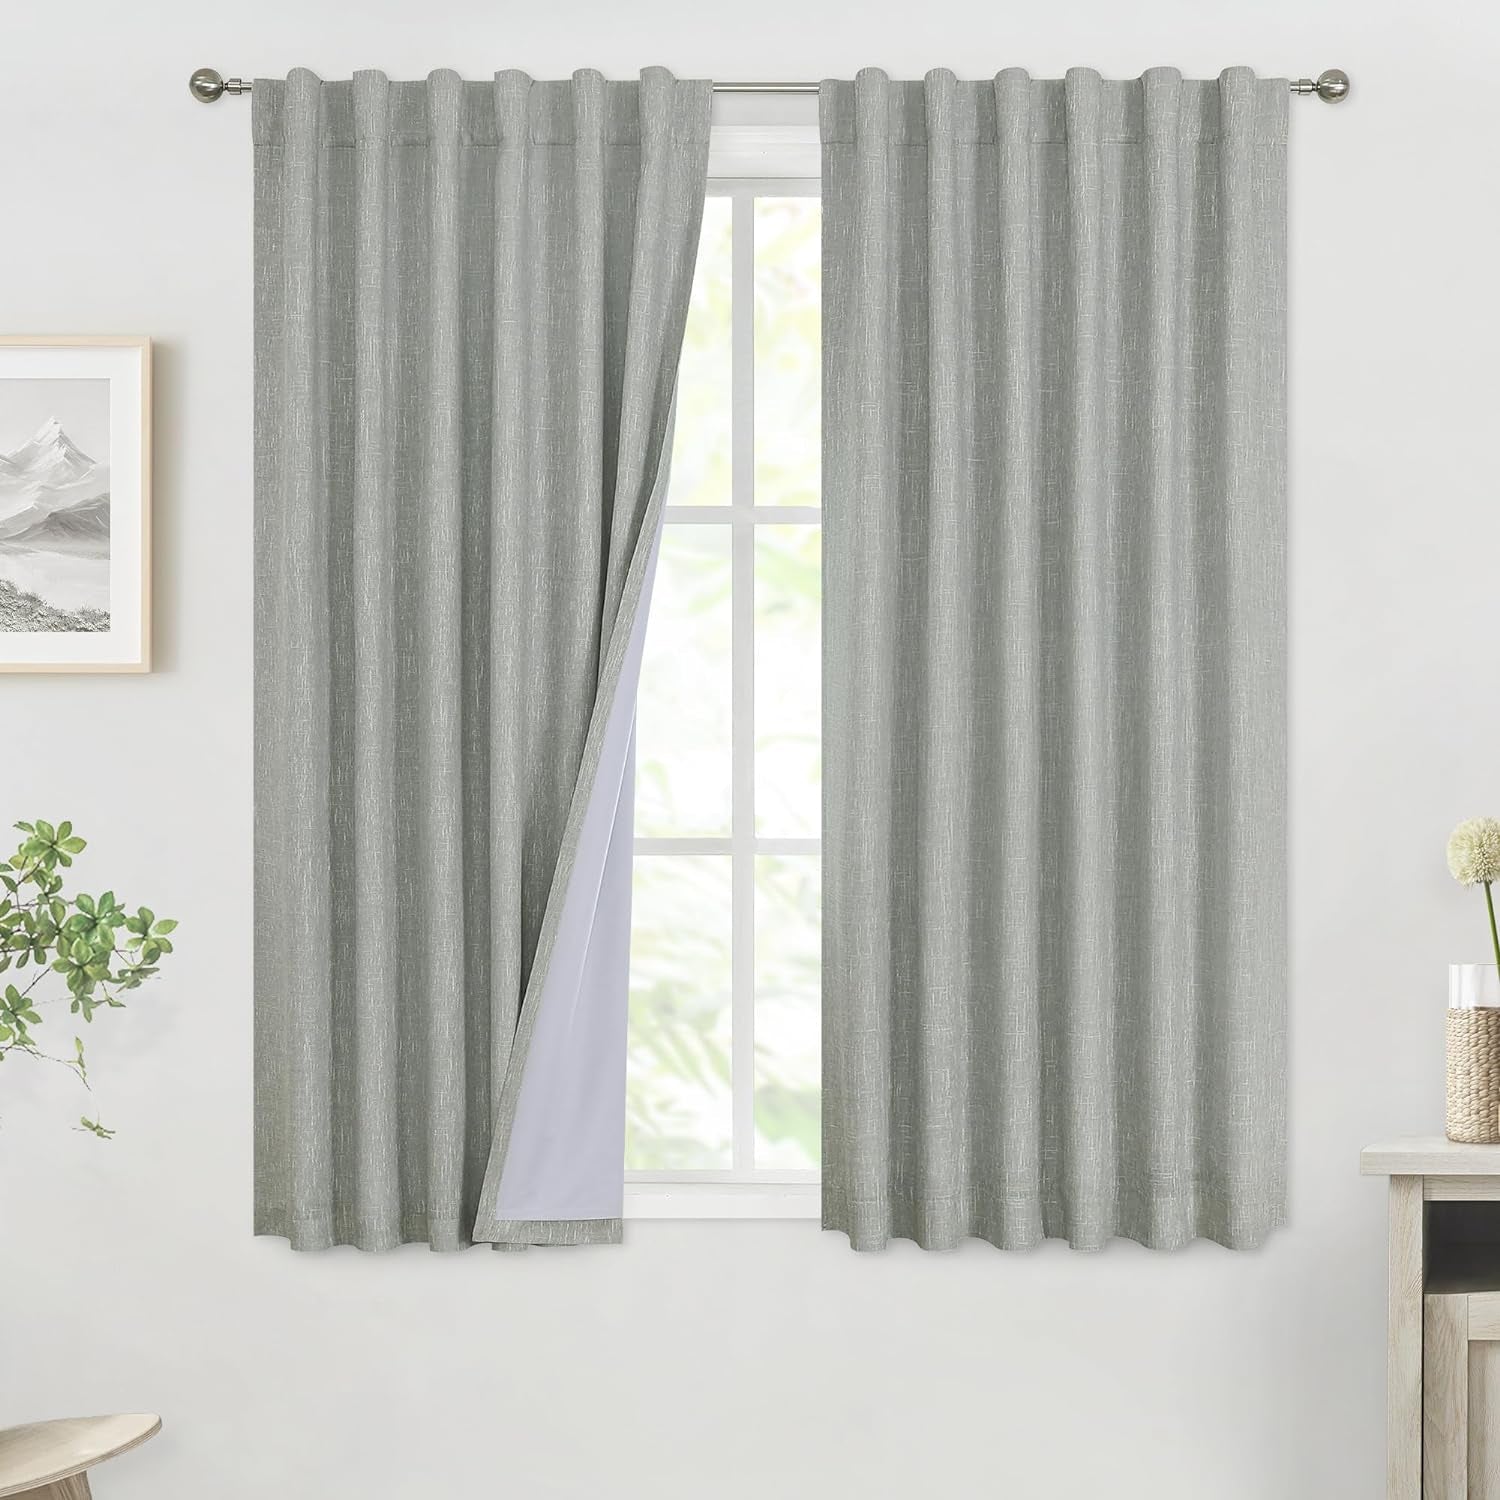 Vision Home Beige Full Blackout Curtains 84 Inch for Bedroom Living Room Darkening Farmhouse Window Treatment Panels Thermal Insulated Rod Pocket Back Tab Soundproof Linen Drapes 2 Panels 50" Wx84 L  Vision Home Neutral Gray 50"X63"X2 